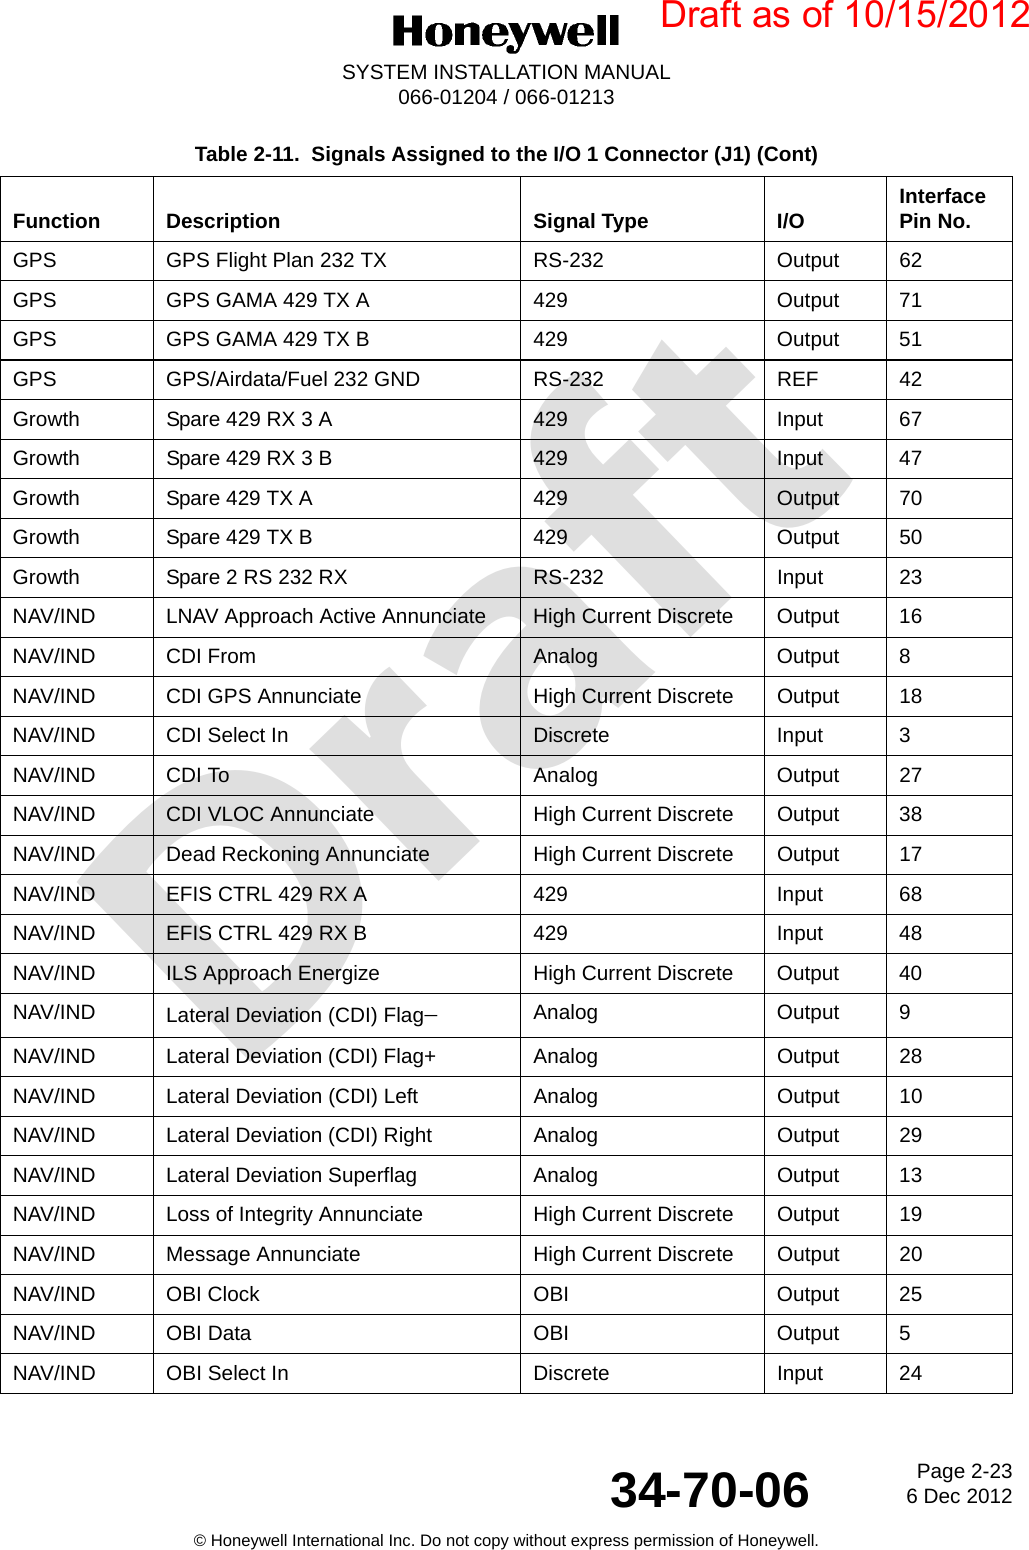 DraftPage 2-236 Dec 201234-70-06SYSTEM INSTALLATION MANUAL066-01204 / 066-01213© Honeywell International Inc. Do not copy without express permission of Honeywell.GPS GPS Flight Plan 232 TX RS-232 Output 62GPS GPS GAMA 429 TX A 429 Output 71GPS GPS GAMA 429 TX B 429 Output 51GPS GPS/Airdata/Fuel 232 GND RS-232 REF 42Growth Spare 429 RX 3 A 429 Input 67Growth Spare 429 RX 3 B 429 Input 47Growth Spare 429 TX A 429 Output 70Growth Spare 429 TX B 429 Output 50Growth Spare 2 RS 232 RX RS-232 Input 23NAV/IND LNAV Approach Active Annunciate High Current Discrete Output 16NAV/IND CDI From Analog Output 8NAV/IND CDI GPS Annunciate High Current Discrete Output 18NAV/IND CDI Select In Discrete Input 3NAV/IND CDI To Analog Output 27NAV/IND CDI VLOC Annunciate High Current Discrete Output 38NAV/IND Dead Reckoning Annunciate High Current Discrete Output 17NAV/IND EFIS CTRL 429 RX A 429 Input 68NAV/IND EFIS CTRL 429 RX B 429 Input 48NAV/IND ILS Approach Energize High Current Discrete Output 40NAV/IND Lateral Deviation (CDI) FlagAnalog Output 9NAV/IND Lateral Deviation (CDI) Flag+ Analog Output 28NAV/IND Lateral Deviation (CDI) Left Analog Output 10NAV/IND Lateral Deviation (CDI) Right Analog Output 29NAV/IND Lateral Deviation Superflag Analog Output 13NAV/IND Loss of Integrity Annunciate High Current Discrete Output 19NAV/IND Message Annunciate High Current Discrete Output 20NAV/IND OBI Clock OBI Output 25NAV/IND OBI Data OBI Output 5NAV/IND OBI Select In Discrete Input 24Table 2-11.  Signals Assigned to the I/O 1 Connector (J1) (Cont)Function Description Signal Type I/O Interface Pin No.Draft as of 10/15/2012